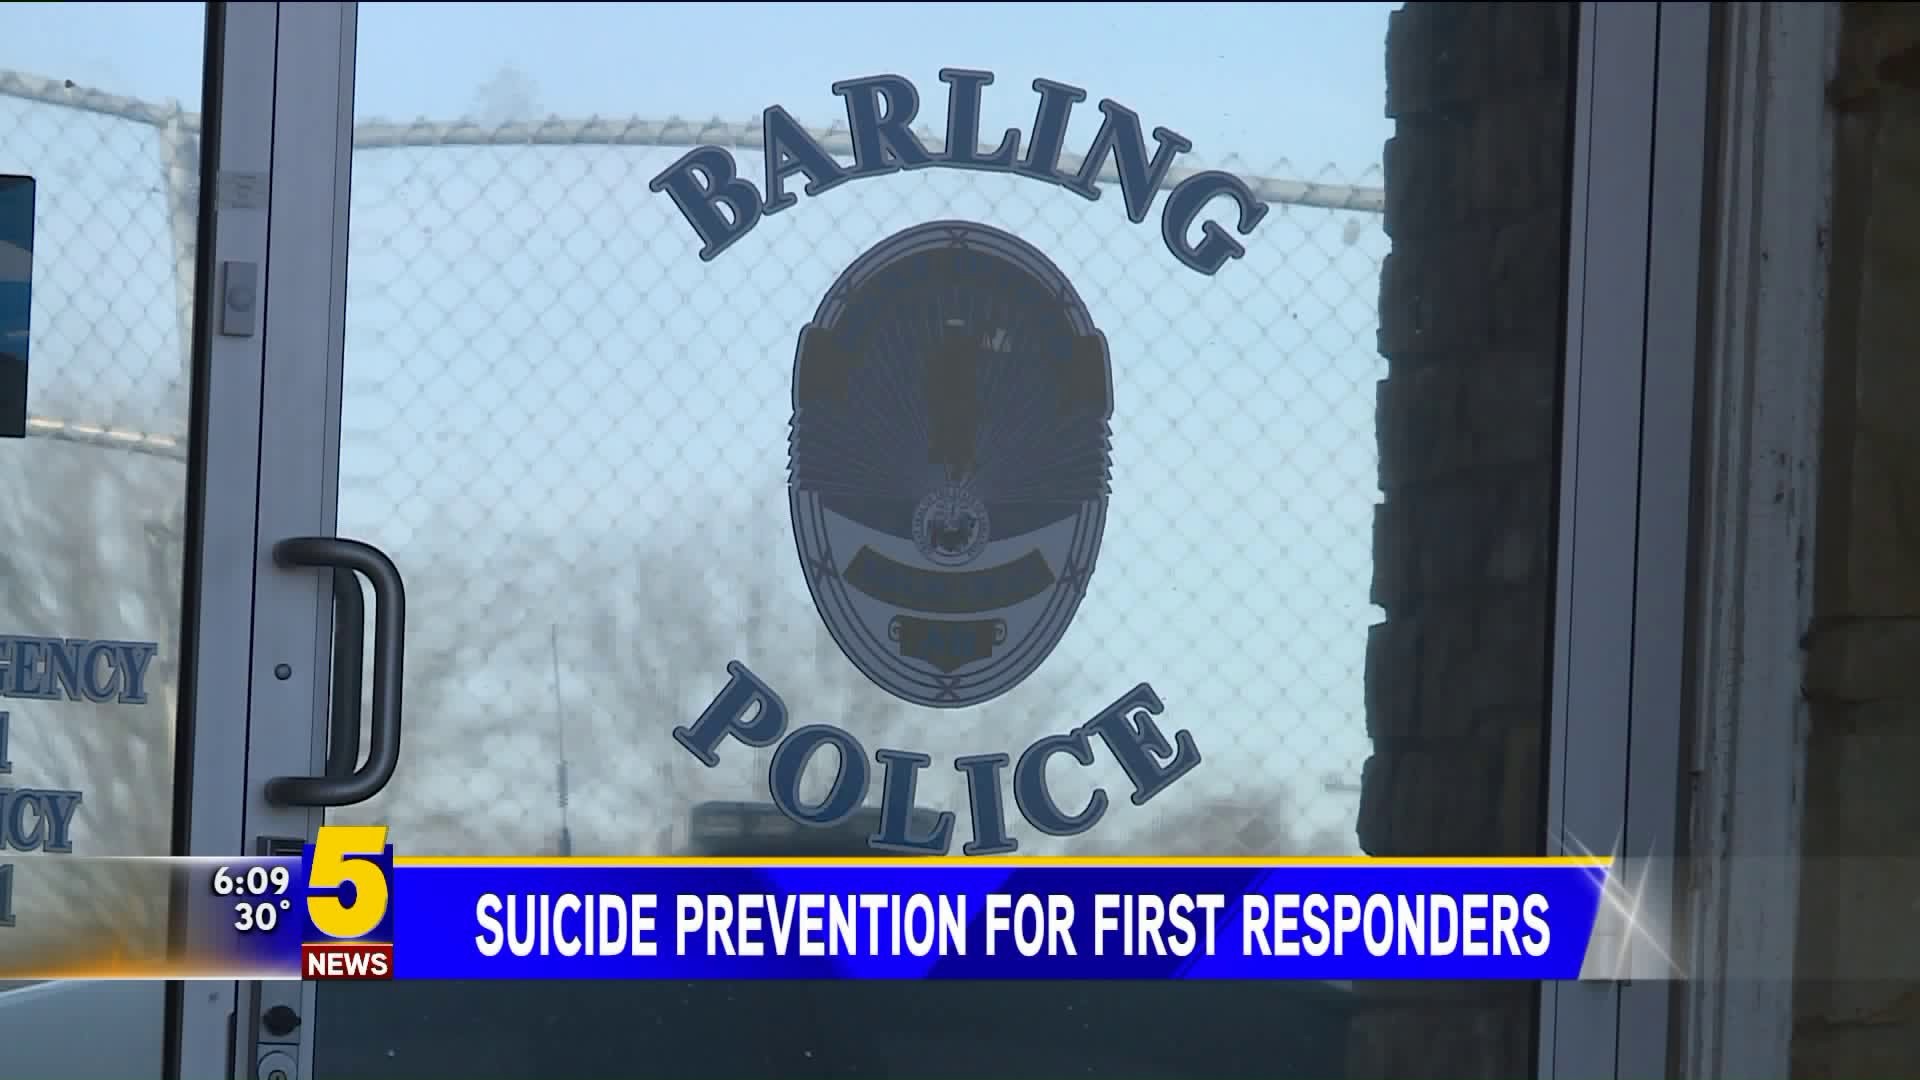 Suicide Prevention For First Responders